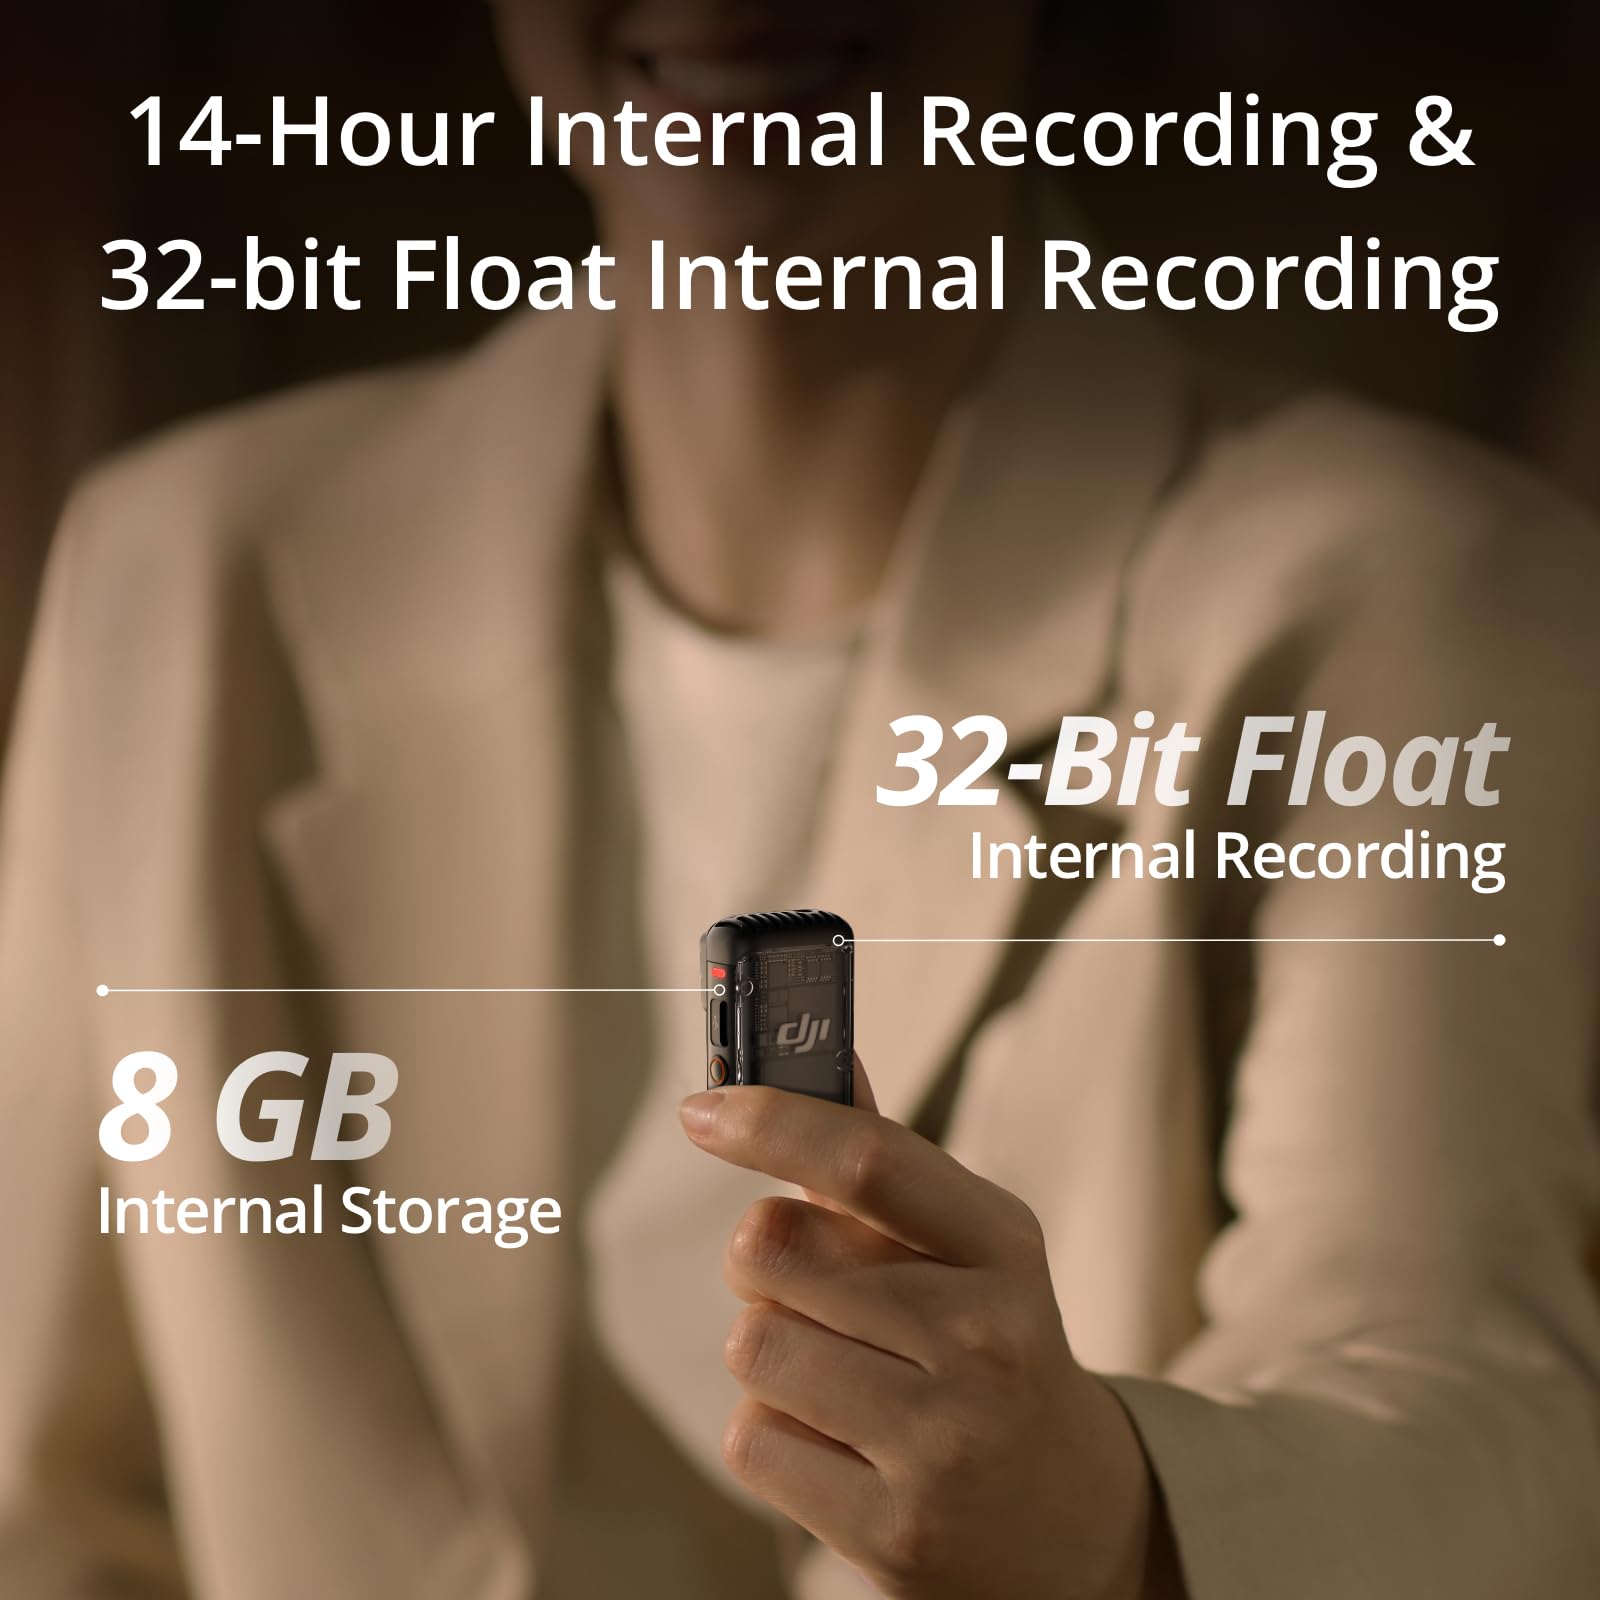 DJI Mic 2 (1 TX + 1 RX), Wireless Microphone with Intelligent Noise Cancelling, 32-bit Float Internal Recording, Optimized Sound, 250m (820 ft.) Range, Microphone for iPhone, Android, Camera, Vlogs